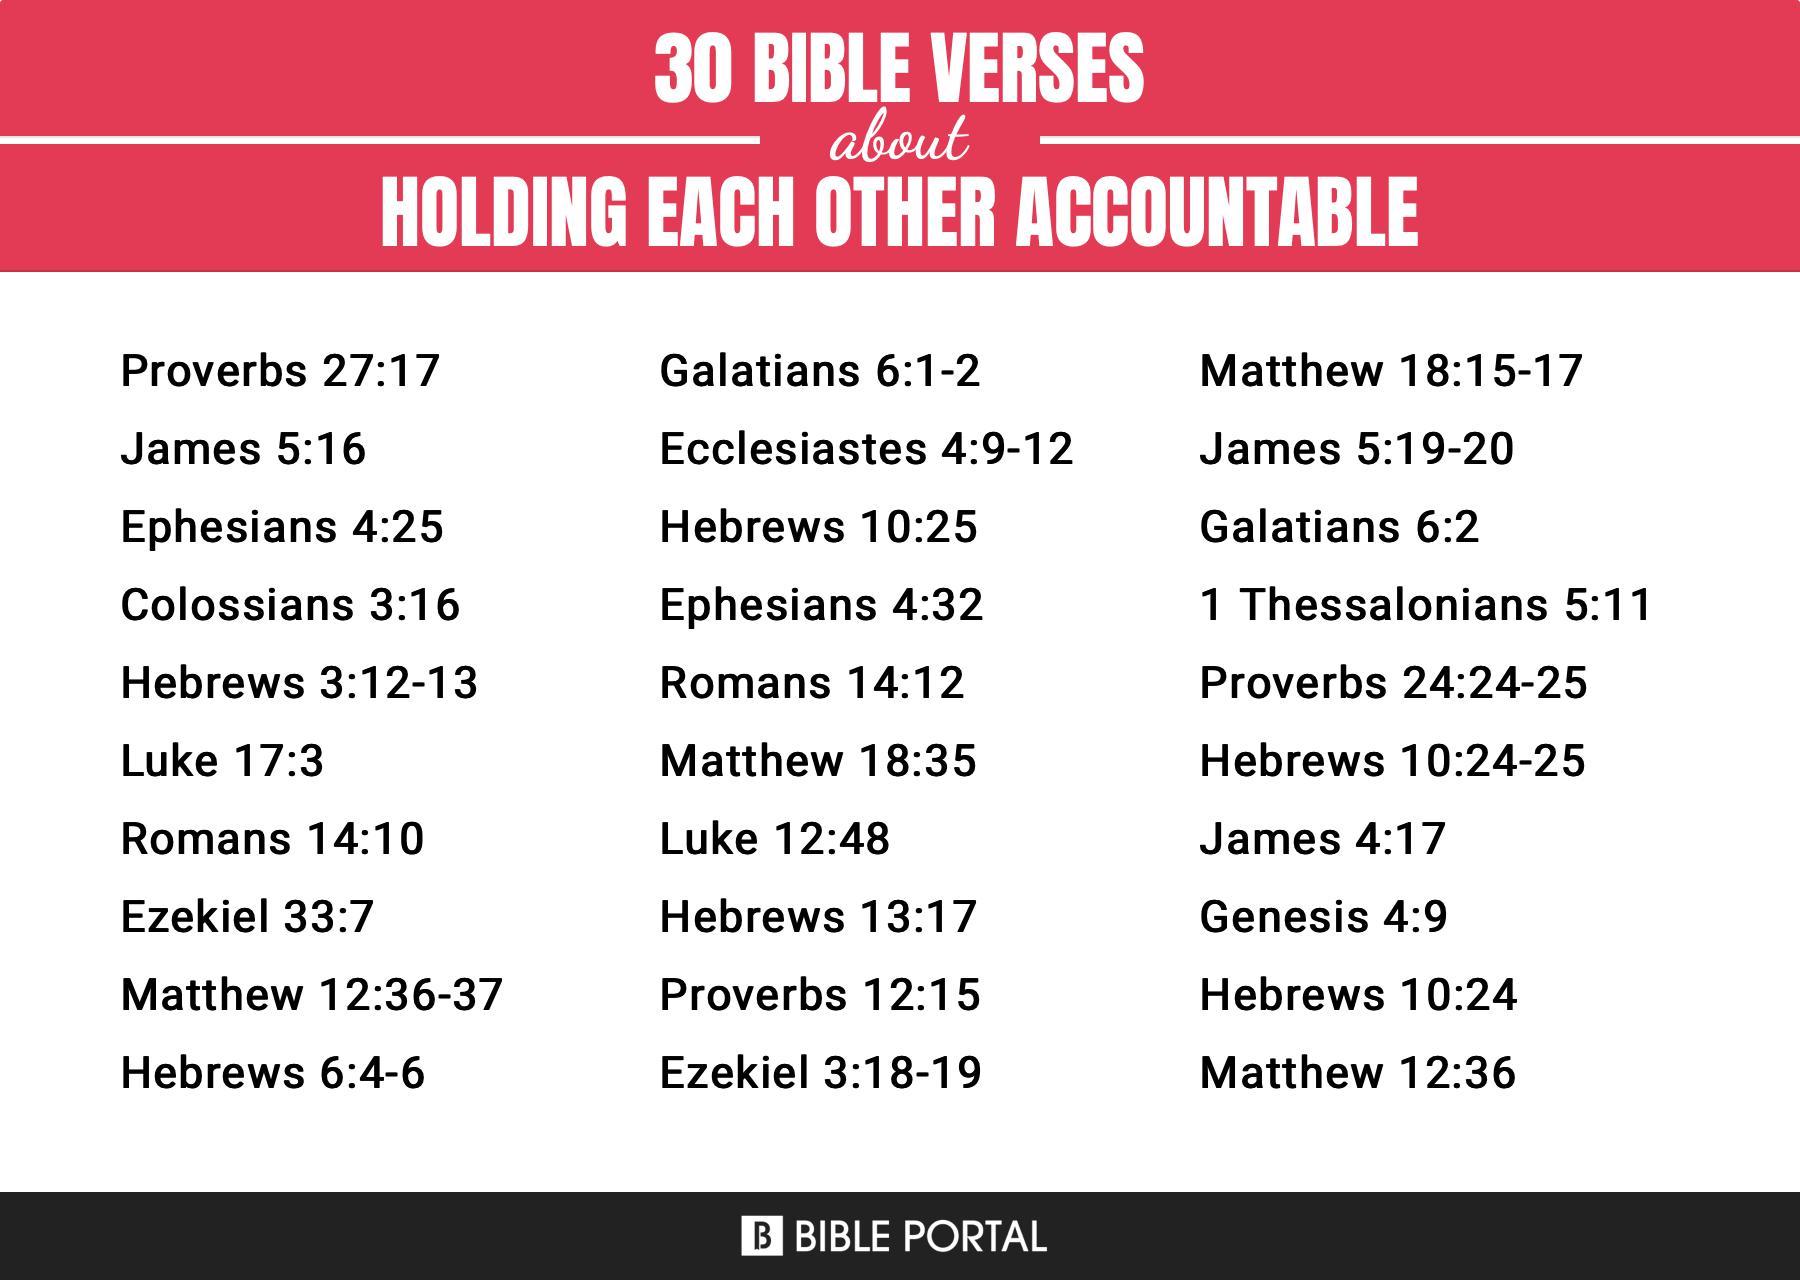 What Does the Bible Say about Holding Each Other Accountable?